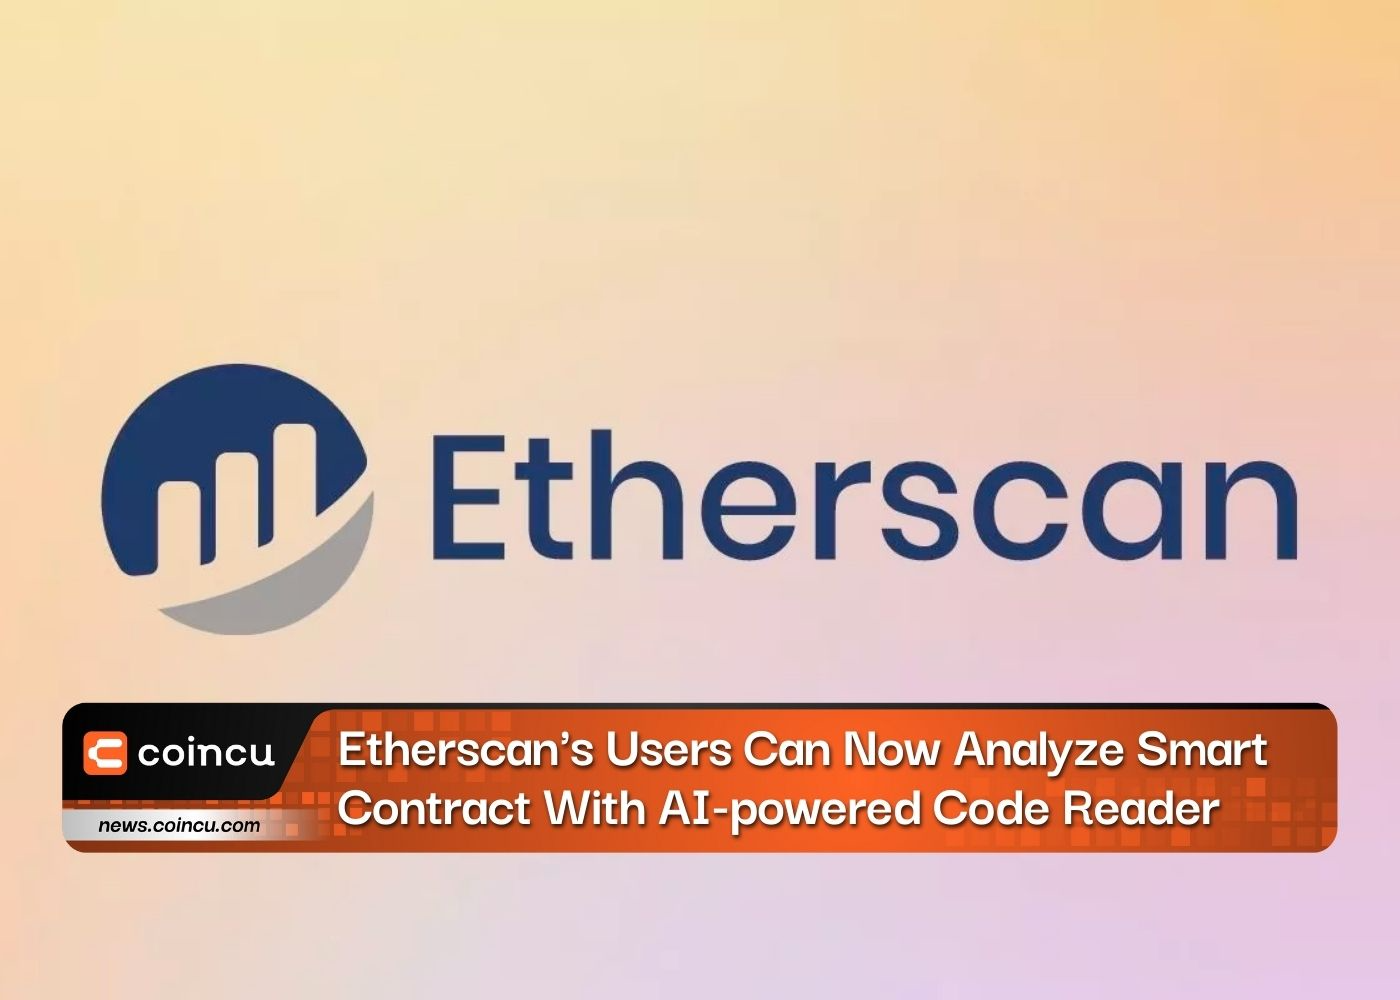 Etherscan's Users Can Now Analyze Smart Contract With AI-powered Code Reader